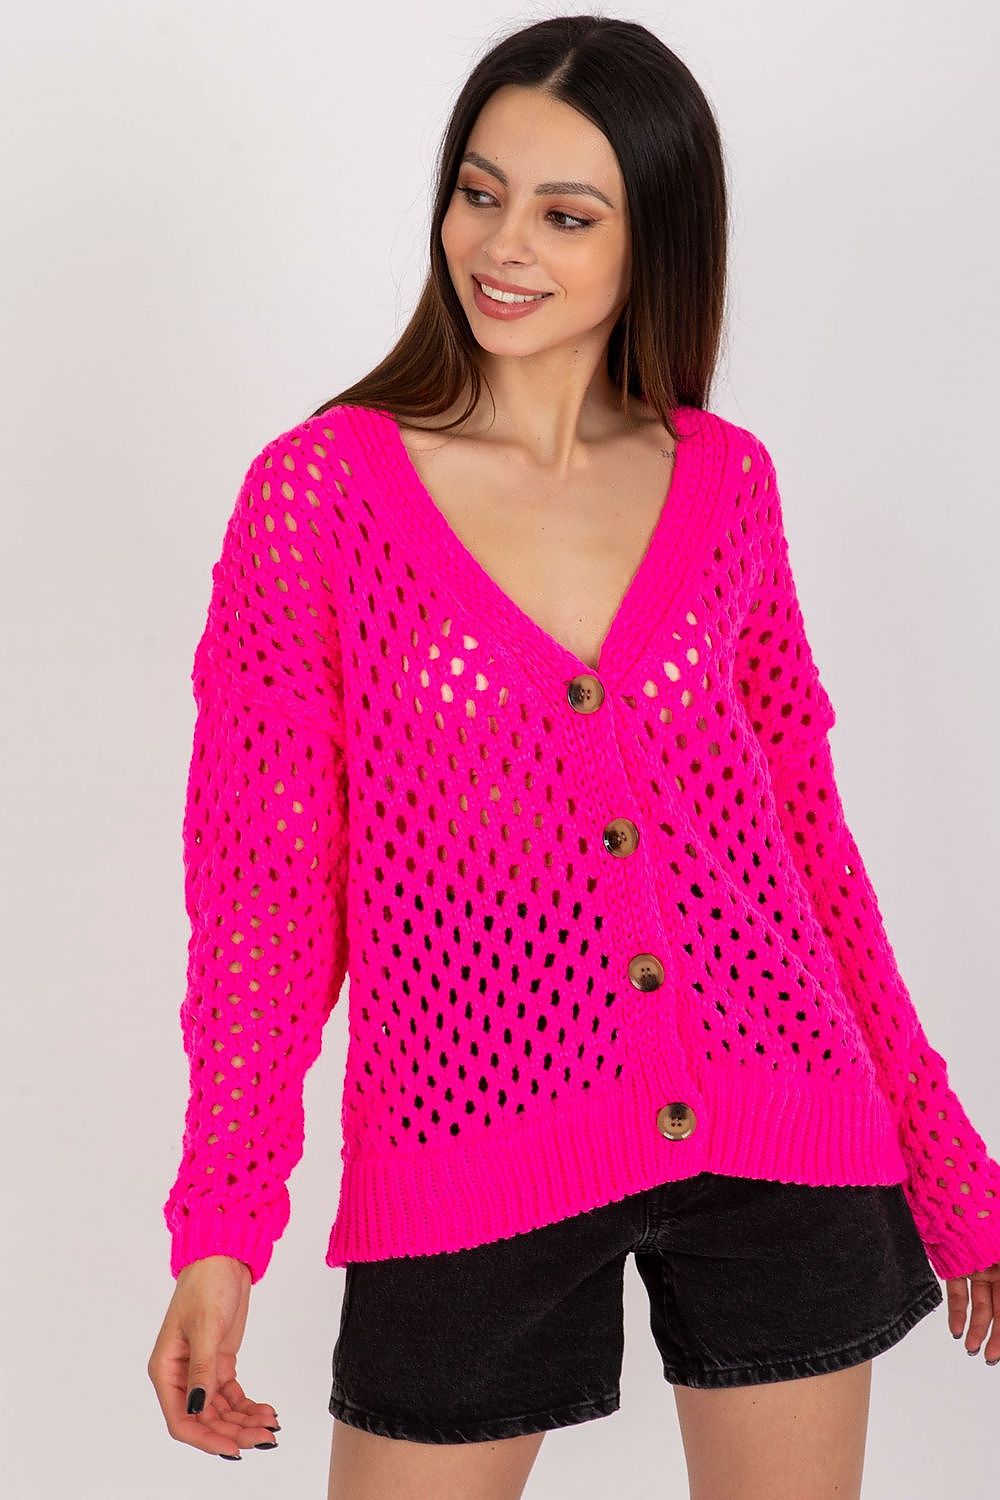 TEEK - Buttoned Openwork V-Neck Cardigan SWEATER TEEK MH pink One Size 